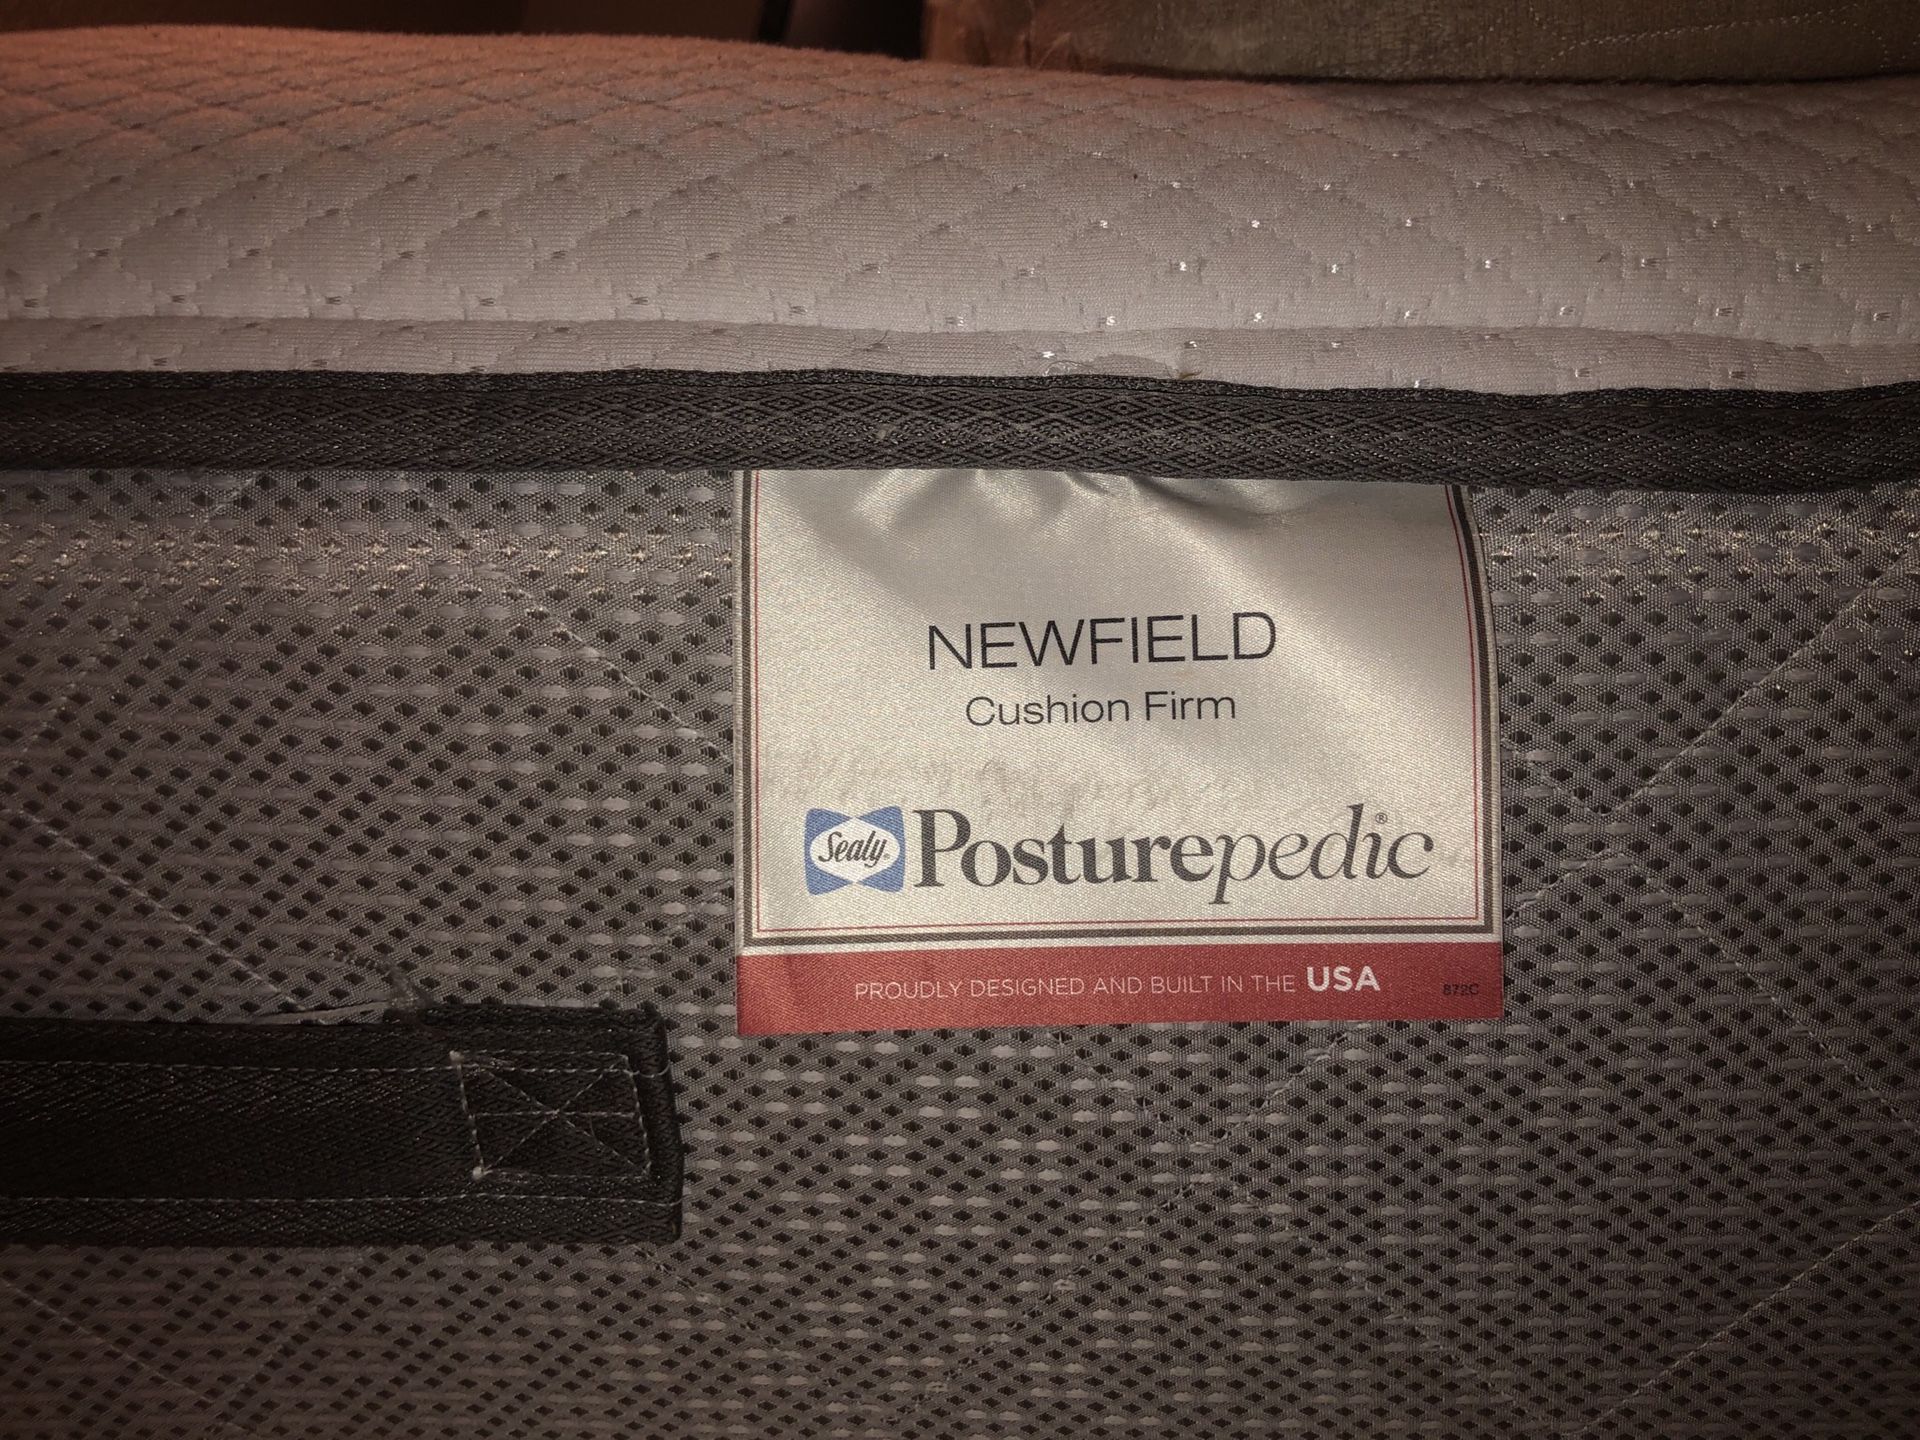 sealy posturepedic newfield cushion firm king mattress reviews